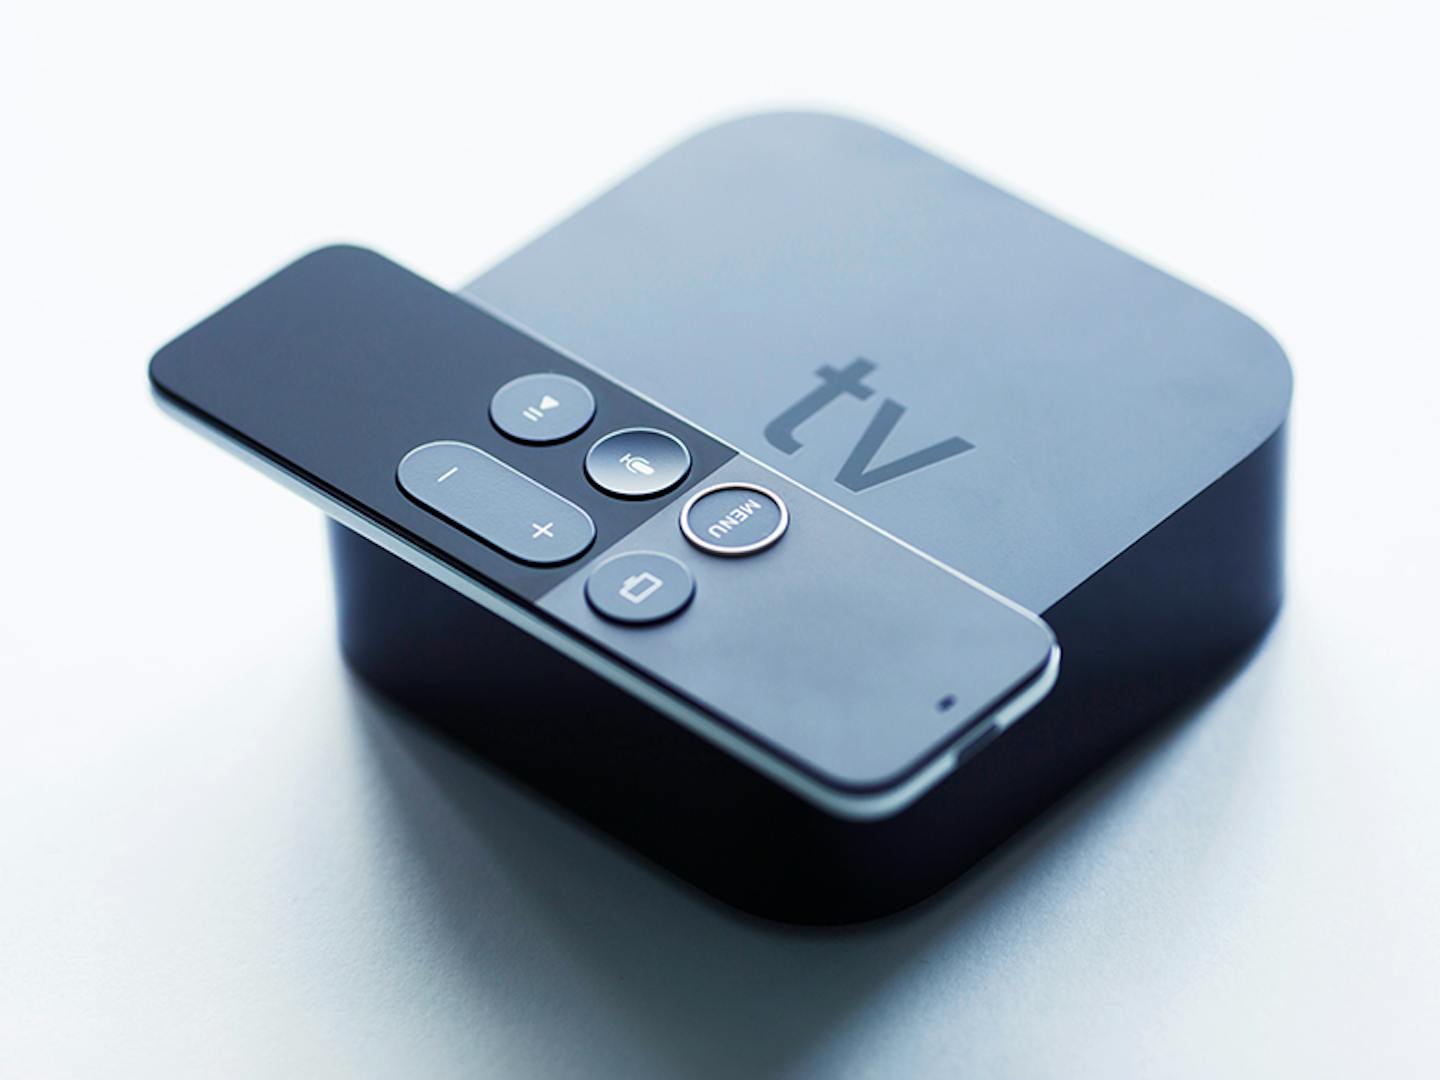 Fi TV compatible devices